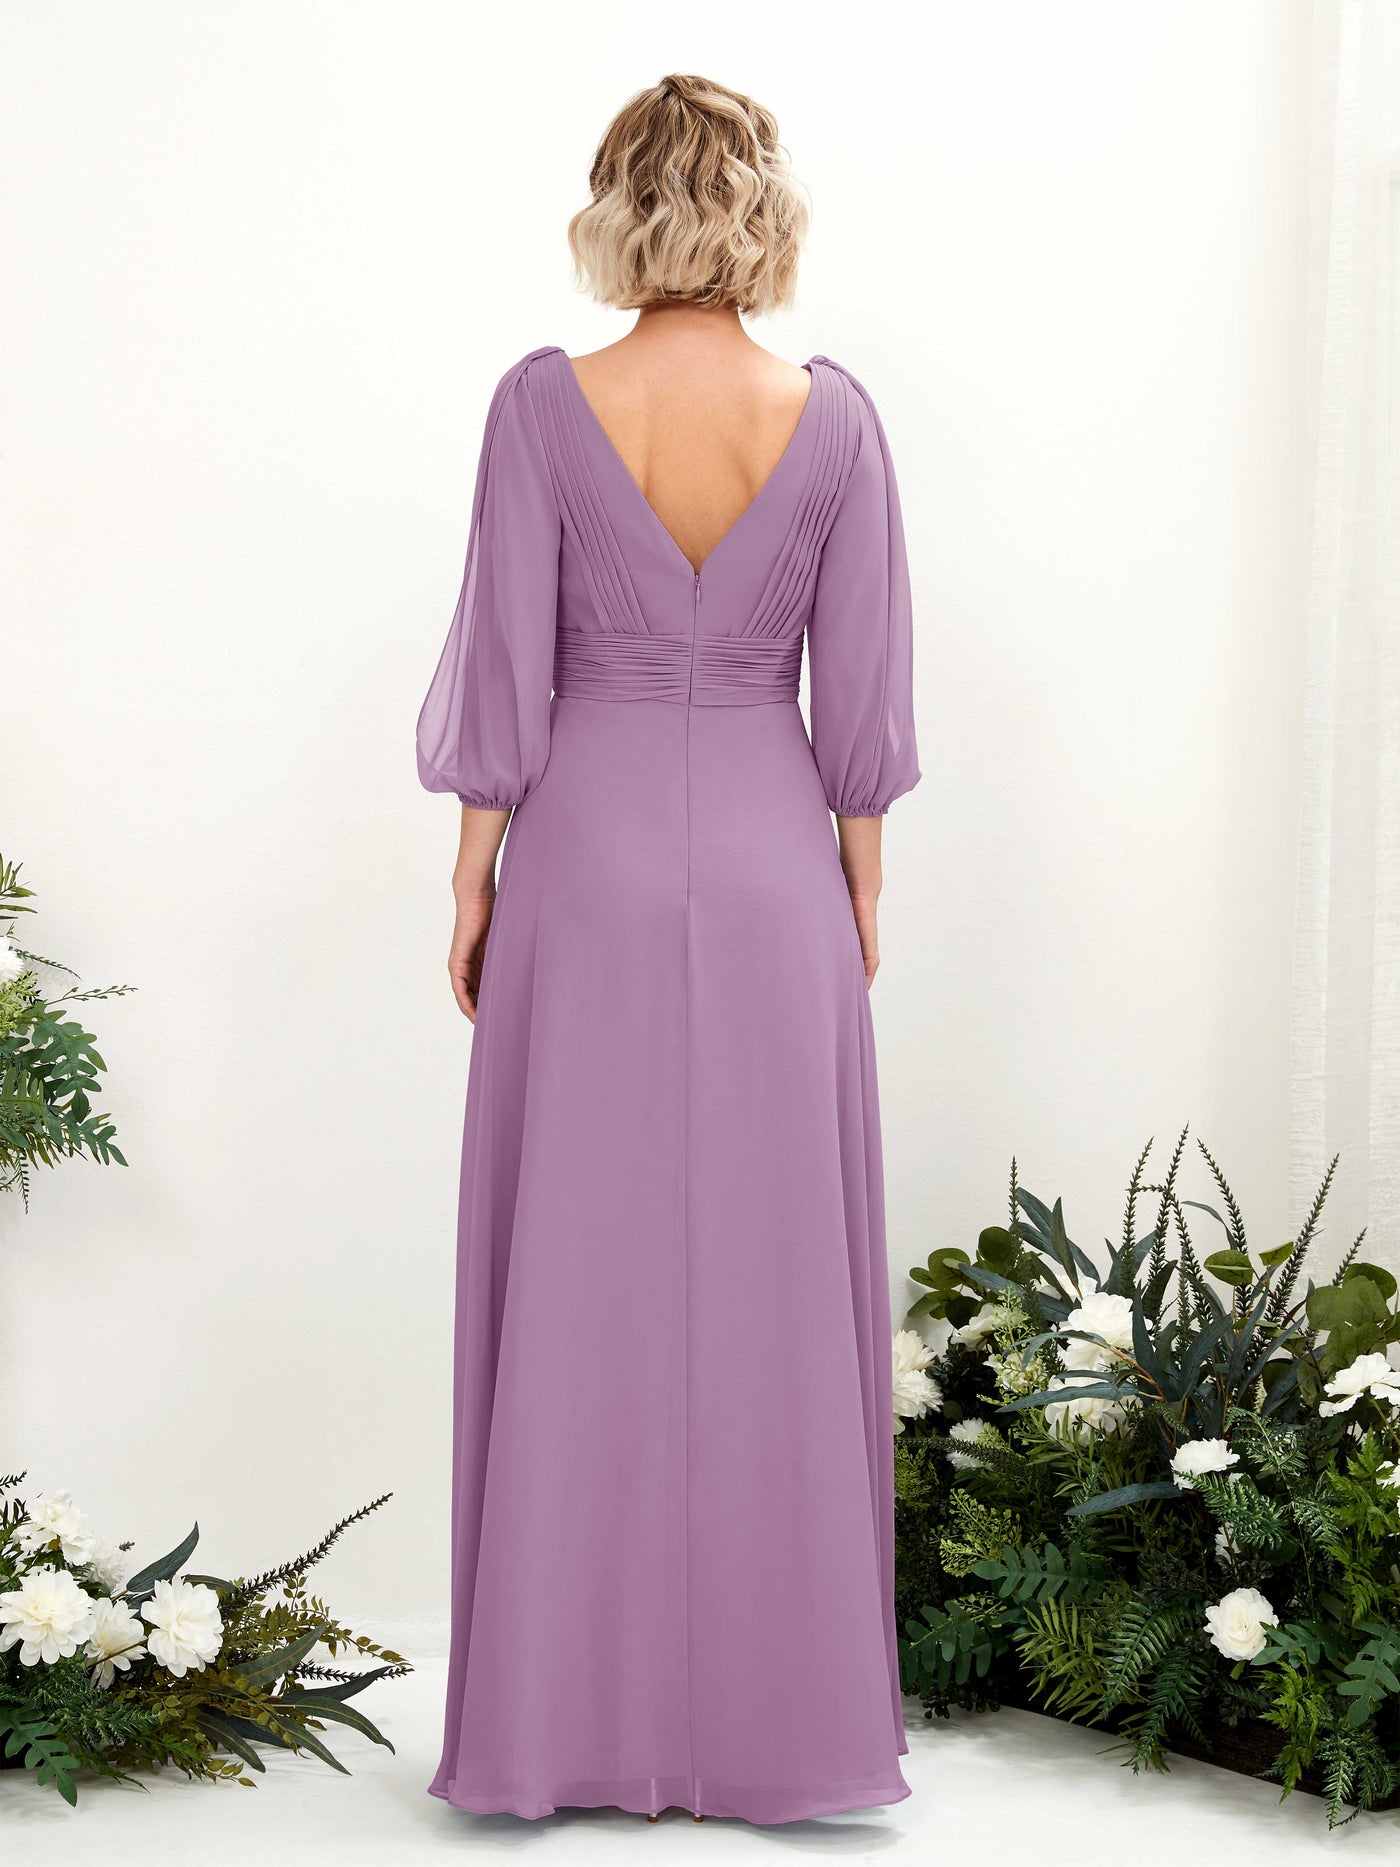 Orchid Mist Bridesmaid Dresses Bridesmaid Dress Chiffon V-neck Full Length Long Sleeves Wedding Party Dress (81223521)#color_orchid-mist